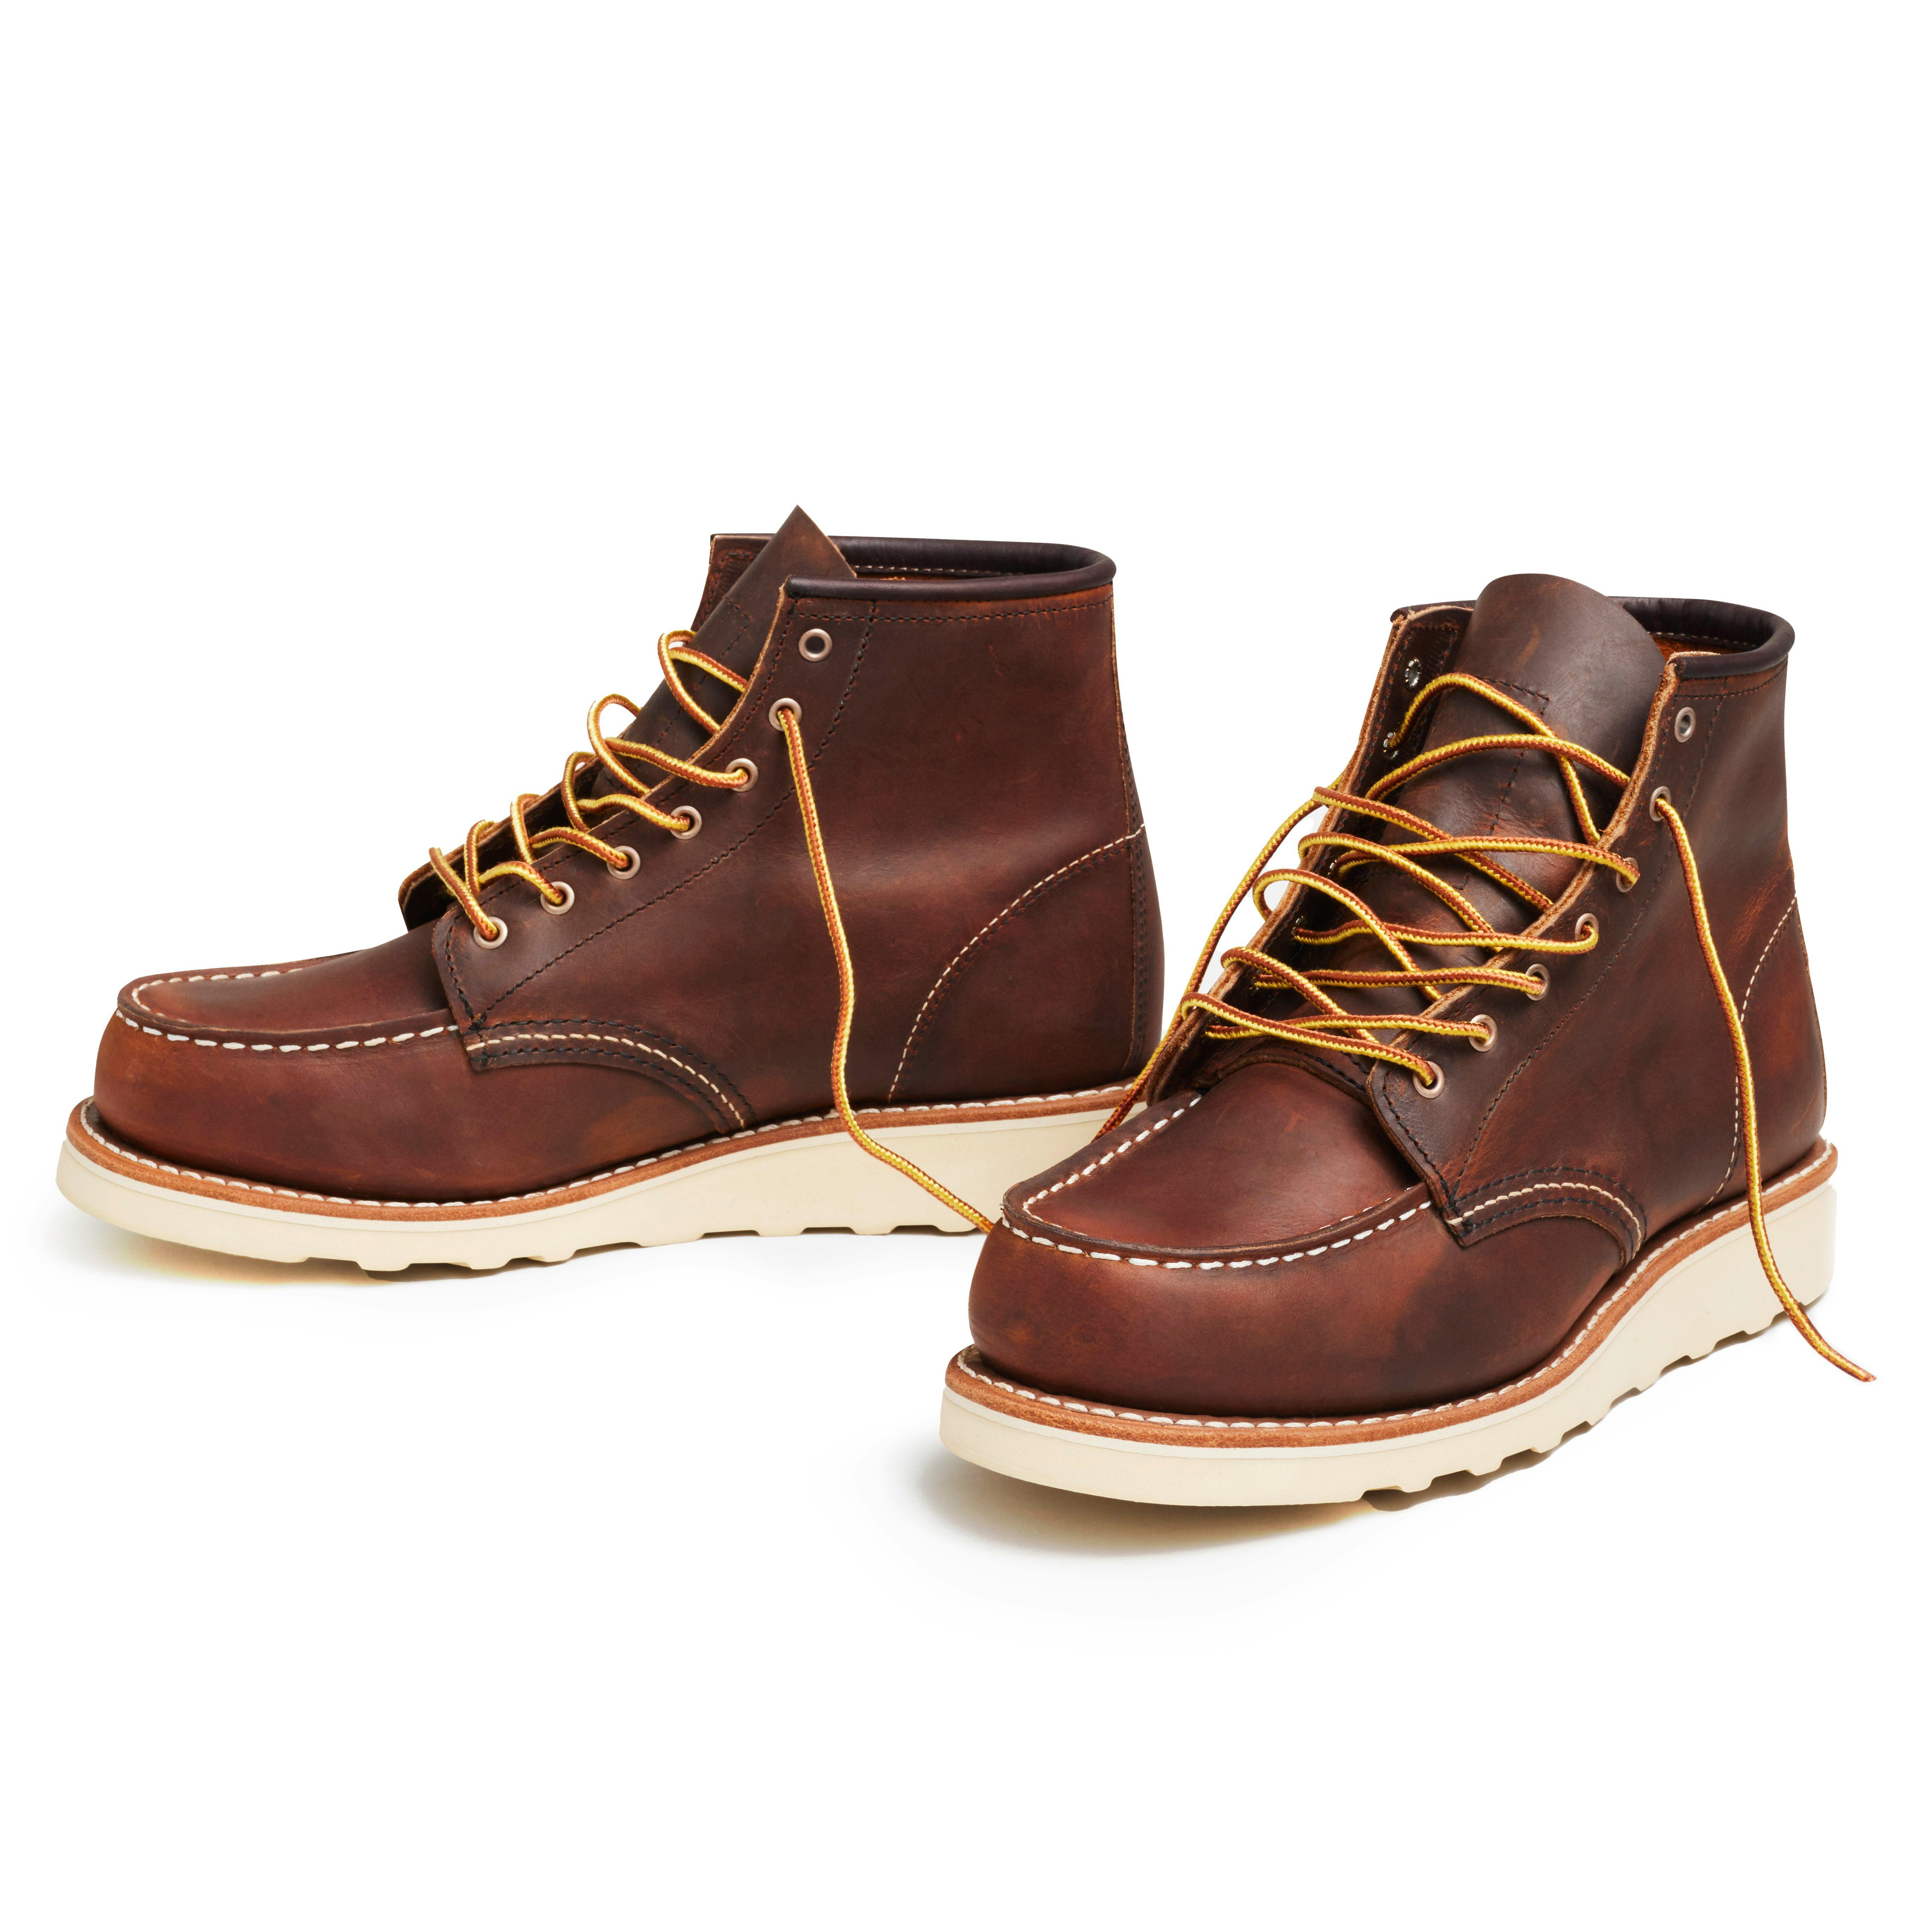 Red Wing 6 Classic Moc Boots - Women's